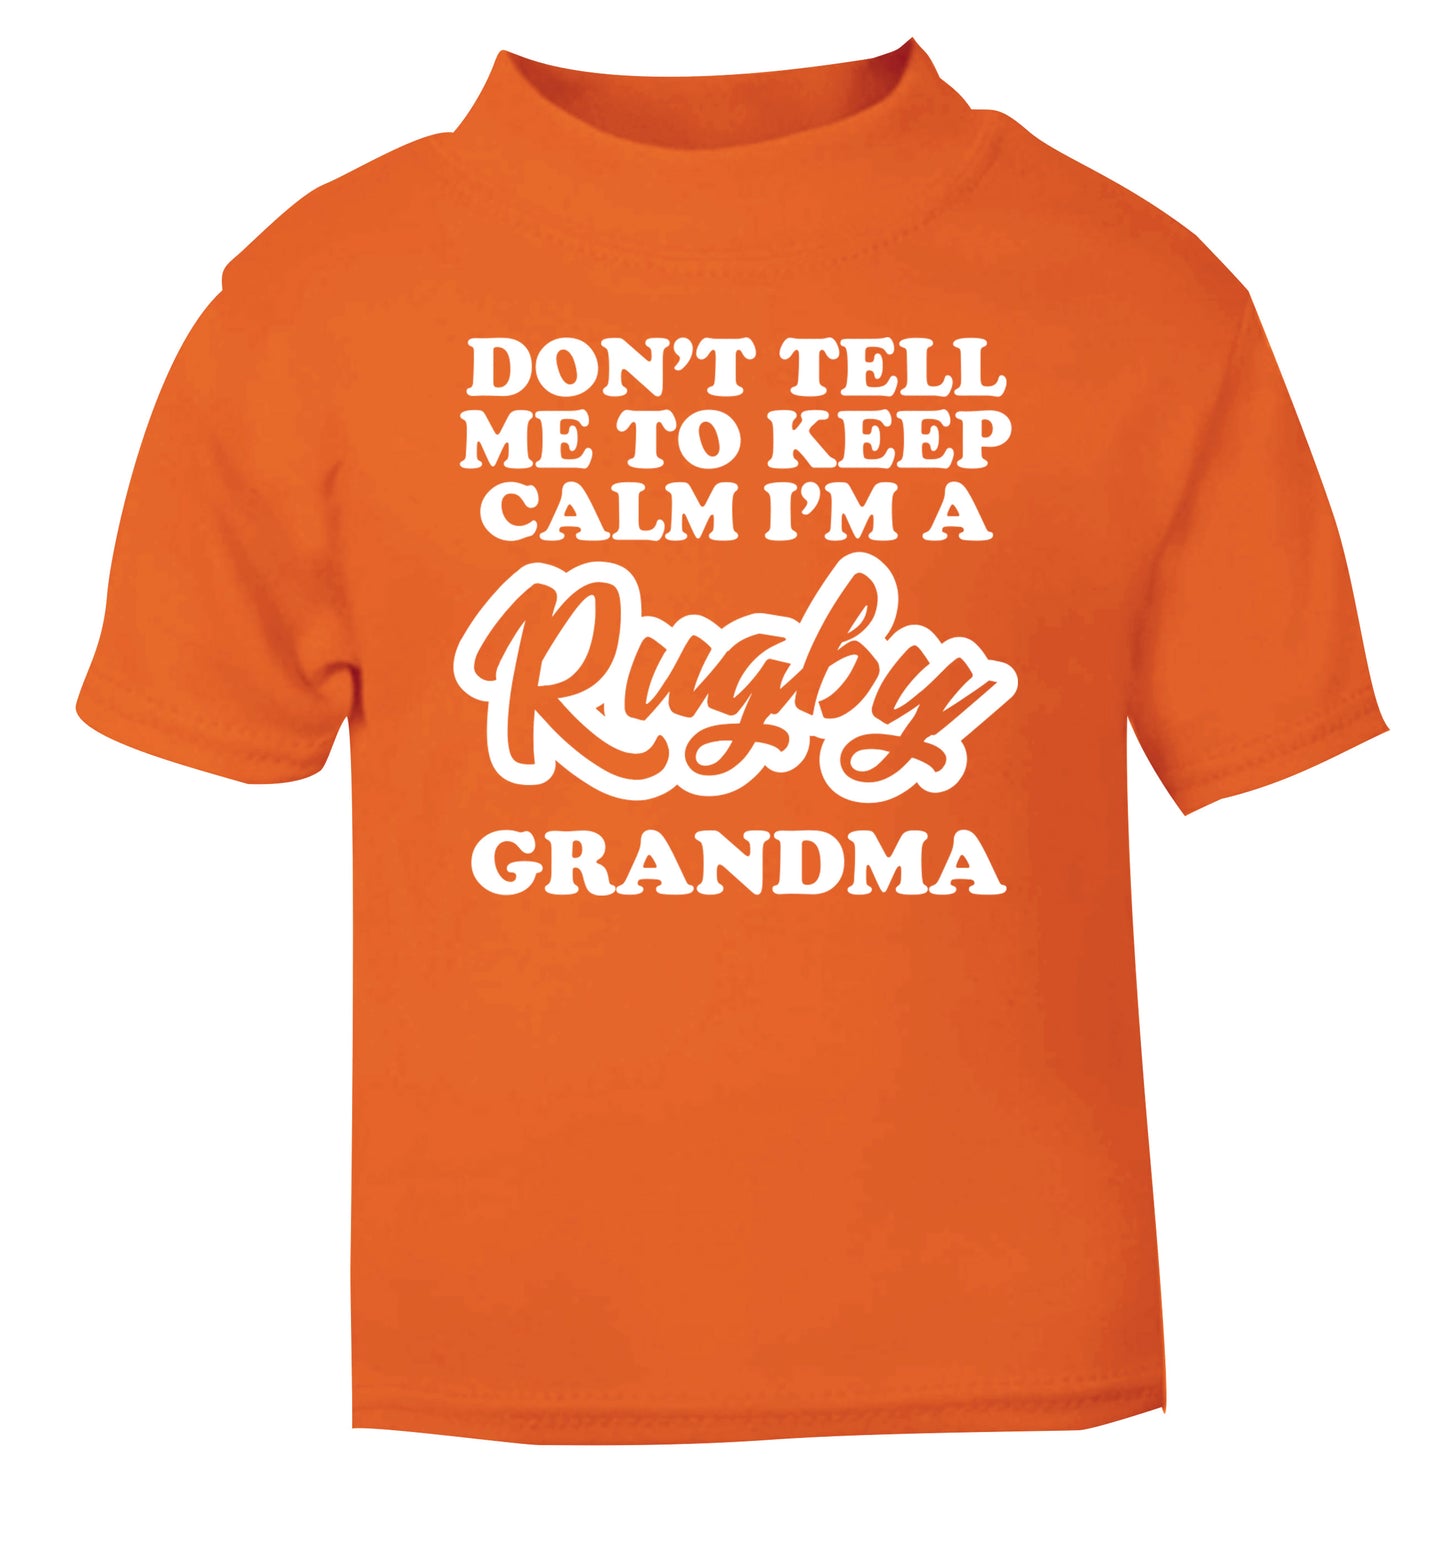 Don't tell me to keep calm I'm a rugby grandma orange Baby Toddler Tshirt 2 Years